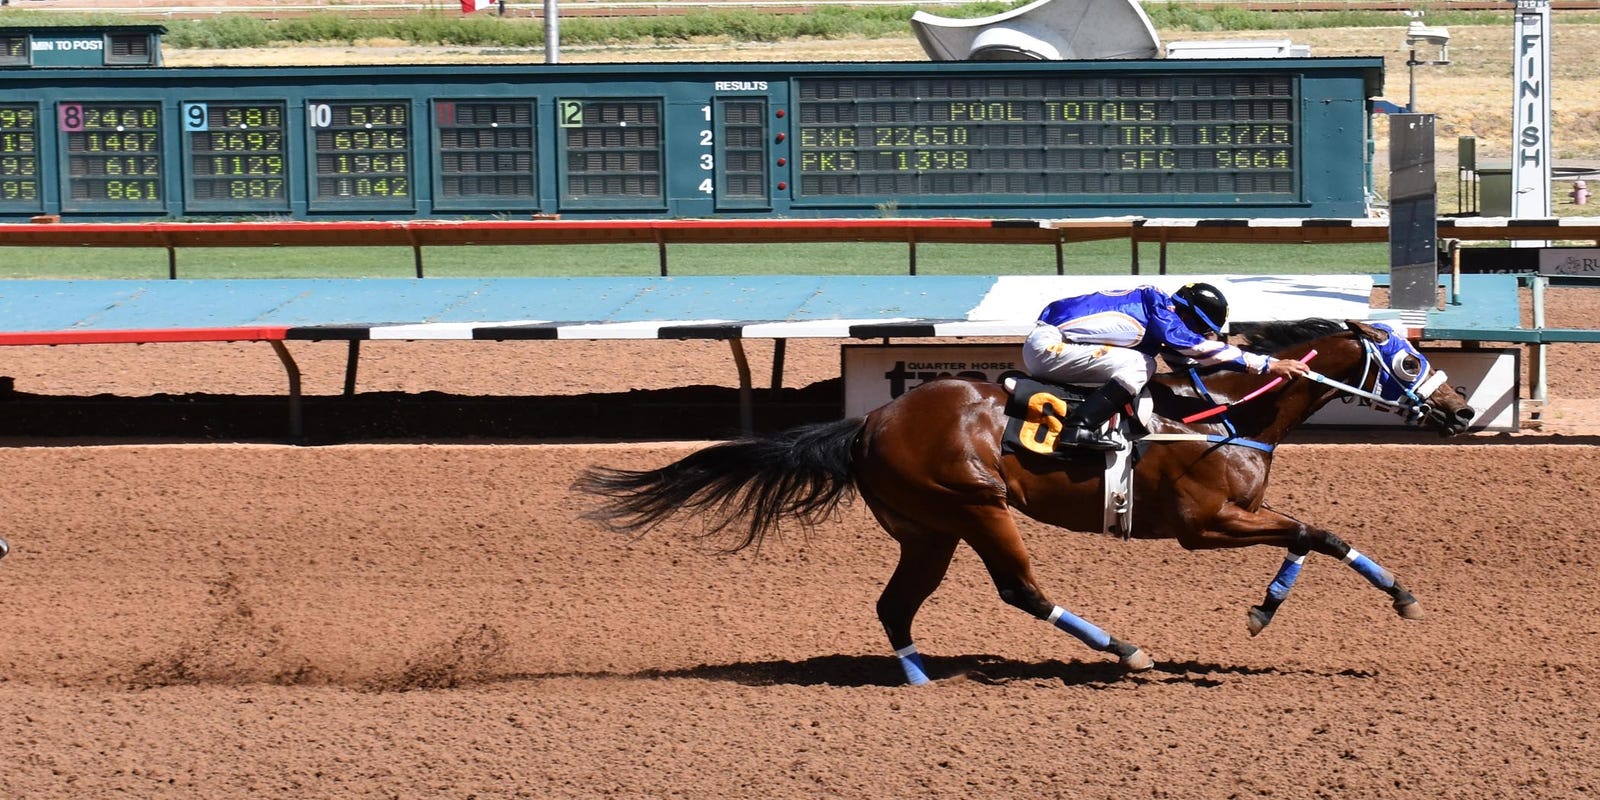 Highlights from opening weekend of horse racing at Ruidoso Downs Race